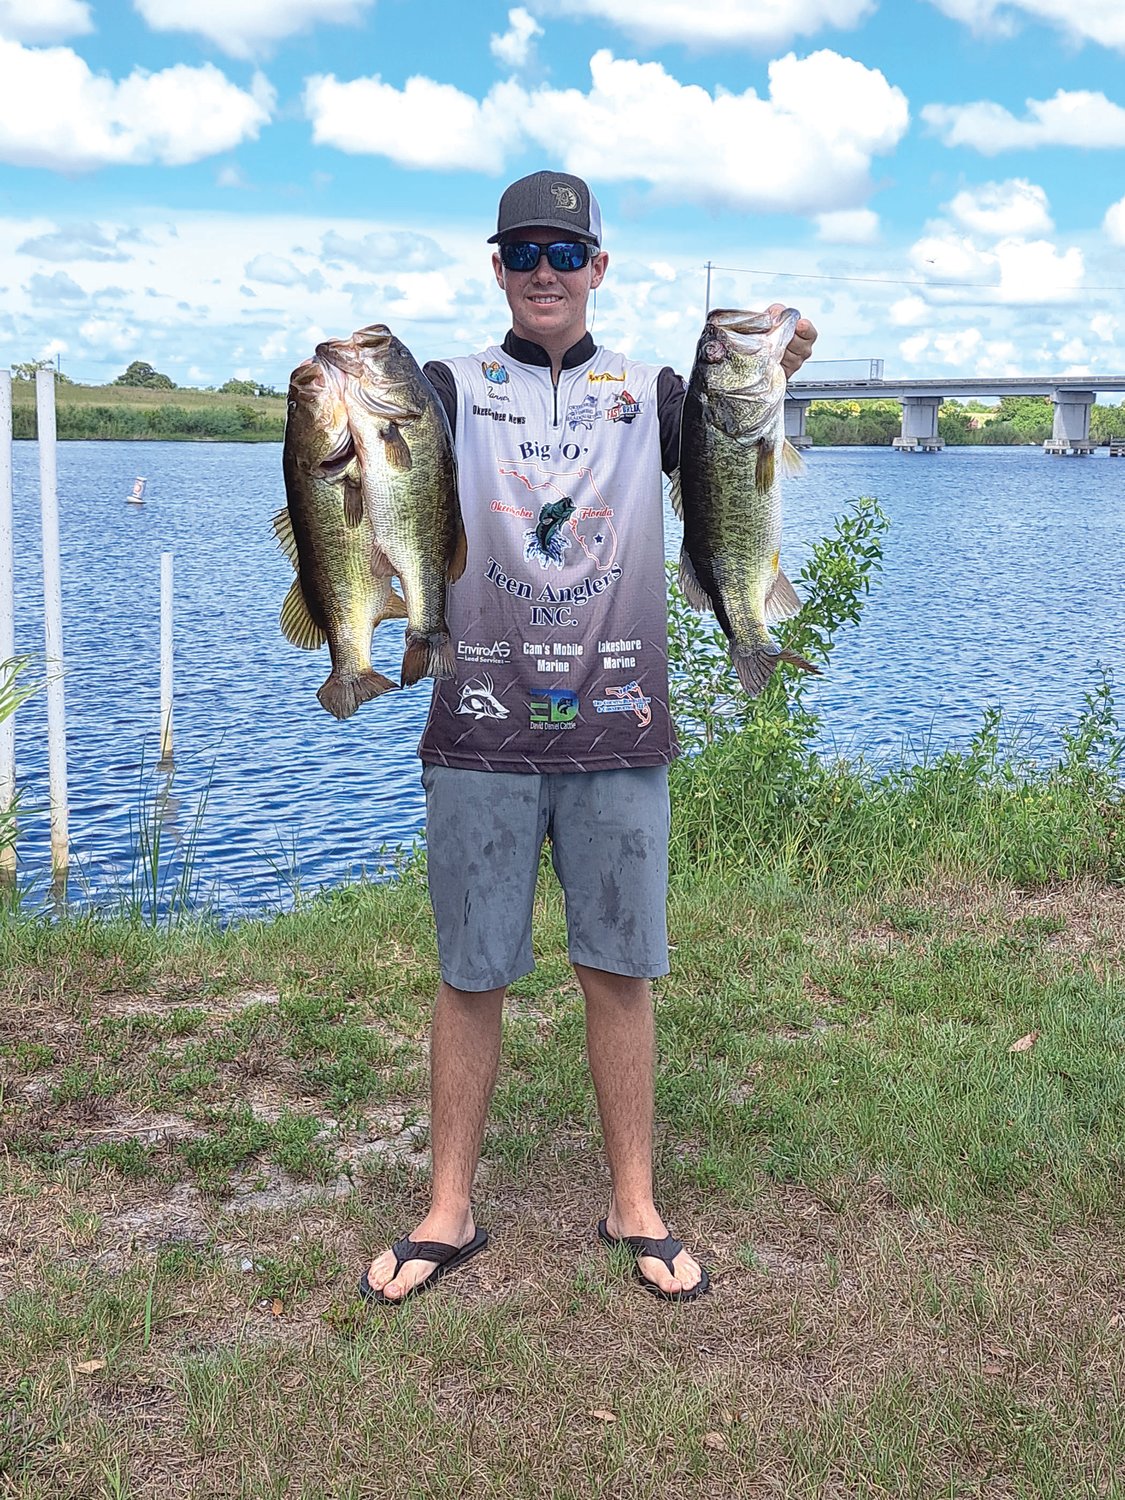 Tanner Seabolt placed first in the 14-19 Age Group with 13.75 pounds and Big Fish weighing 5.92 pounds.